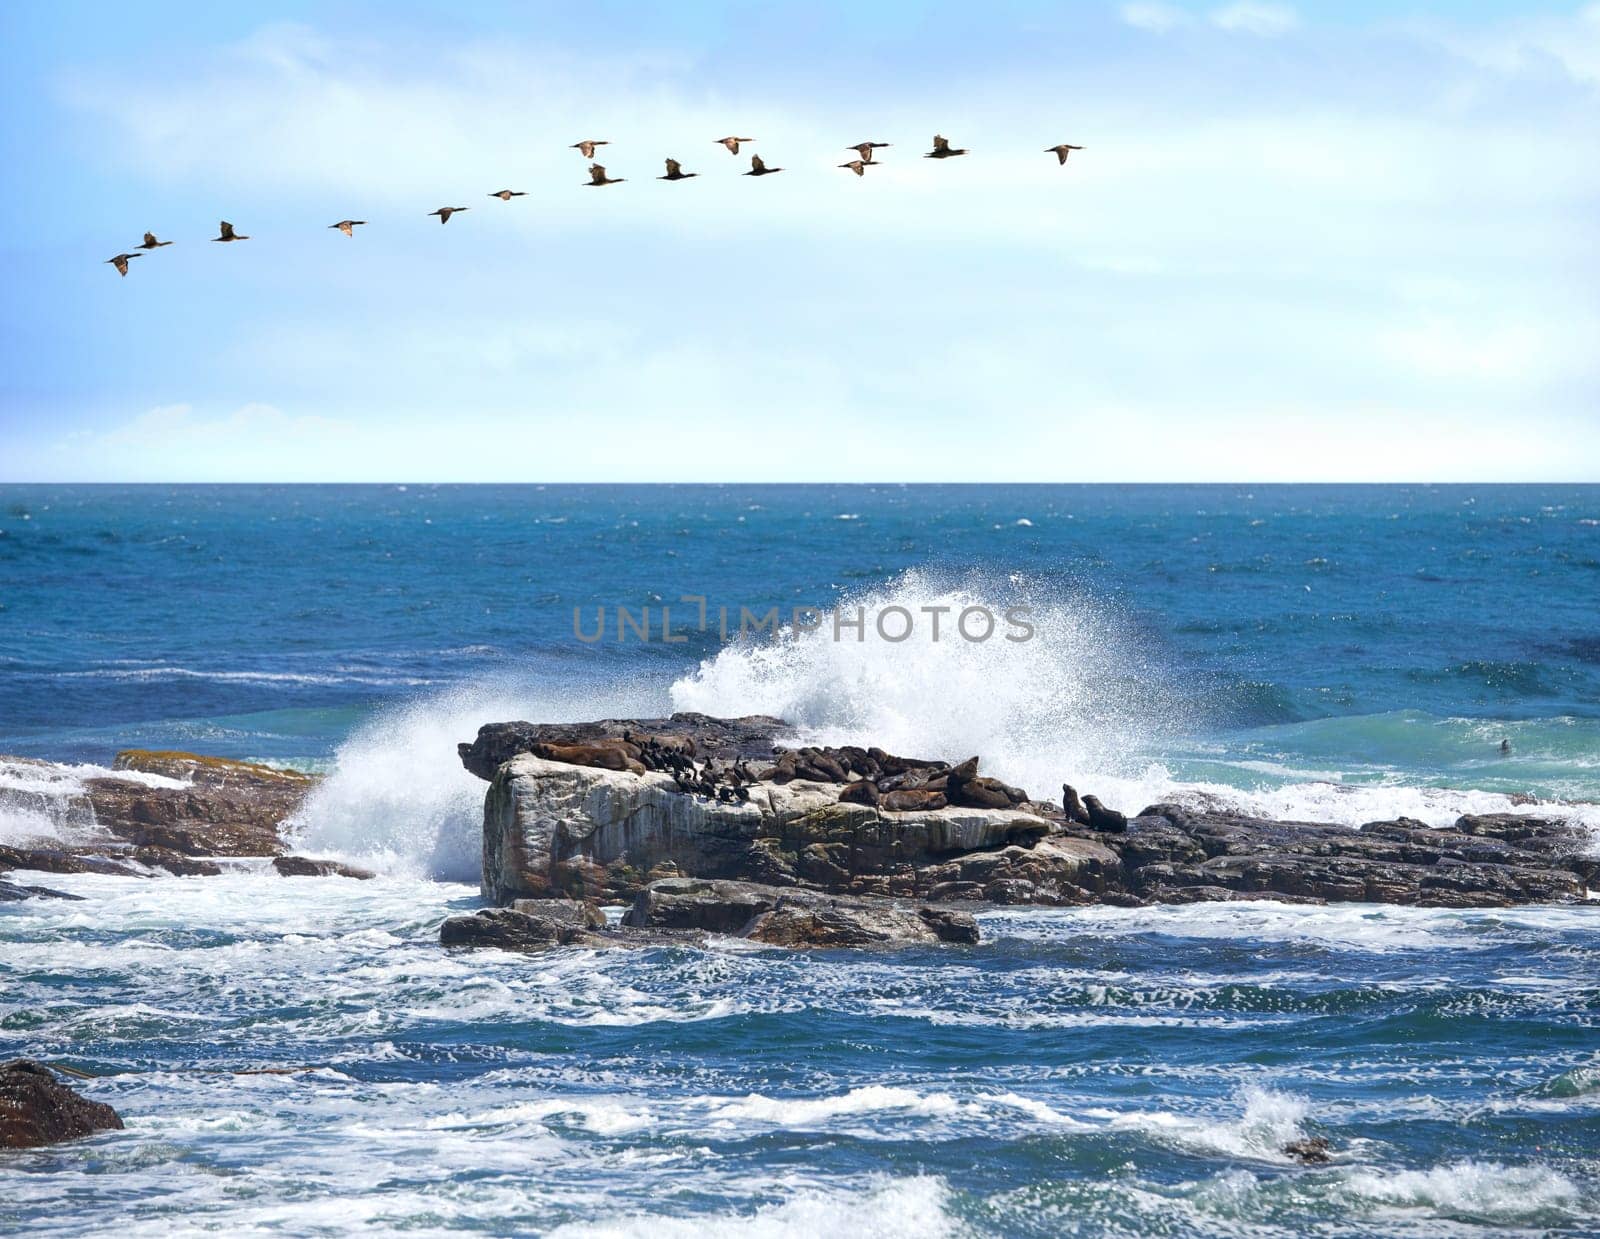 Ocean, blue sky and rock with wave in nature for environment, sustainability and beauty with birds. Water, beach and splash on stone in California for ecosystem, sunshine and background of sea.